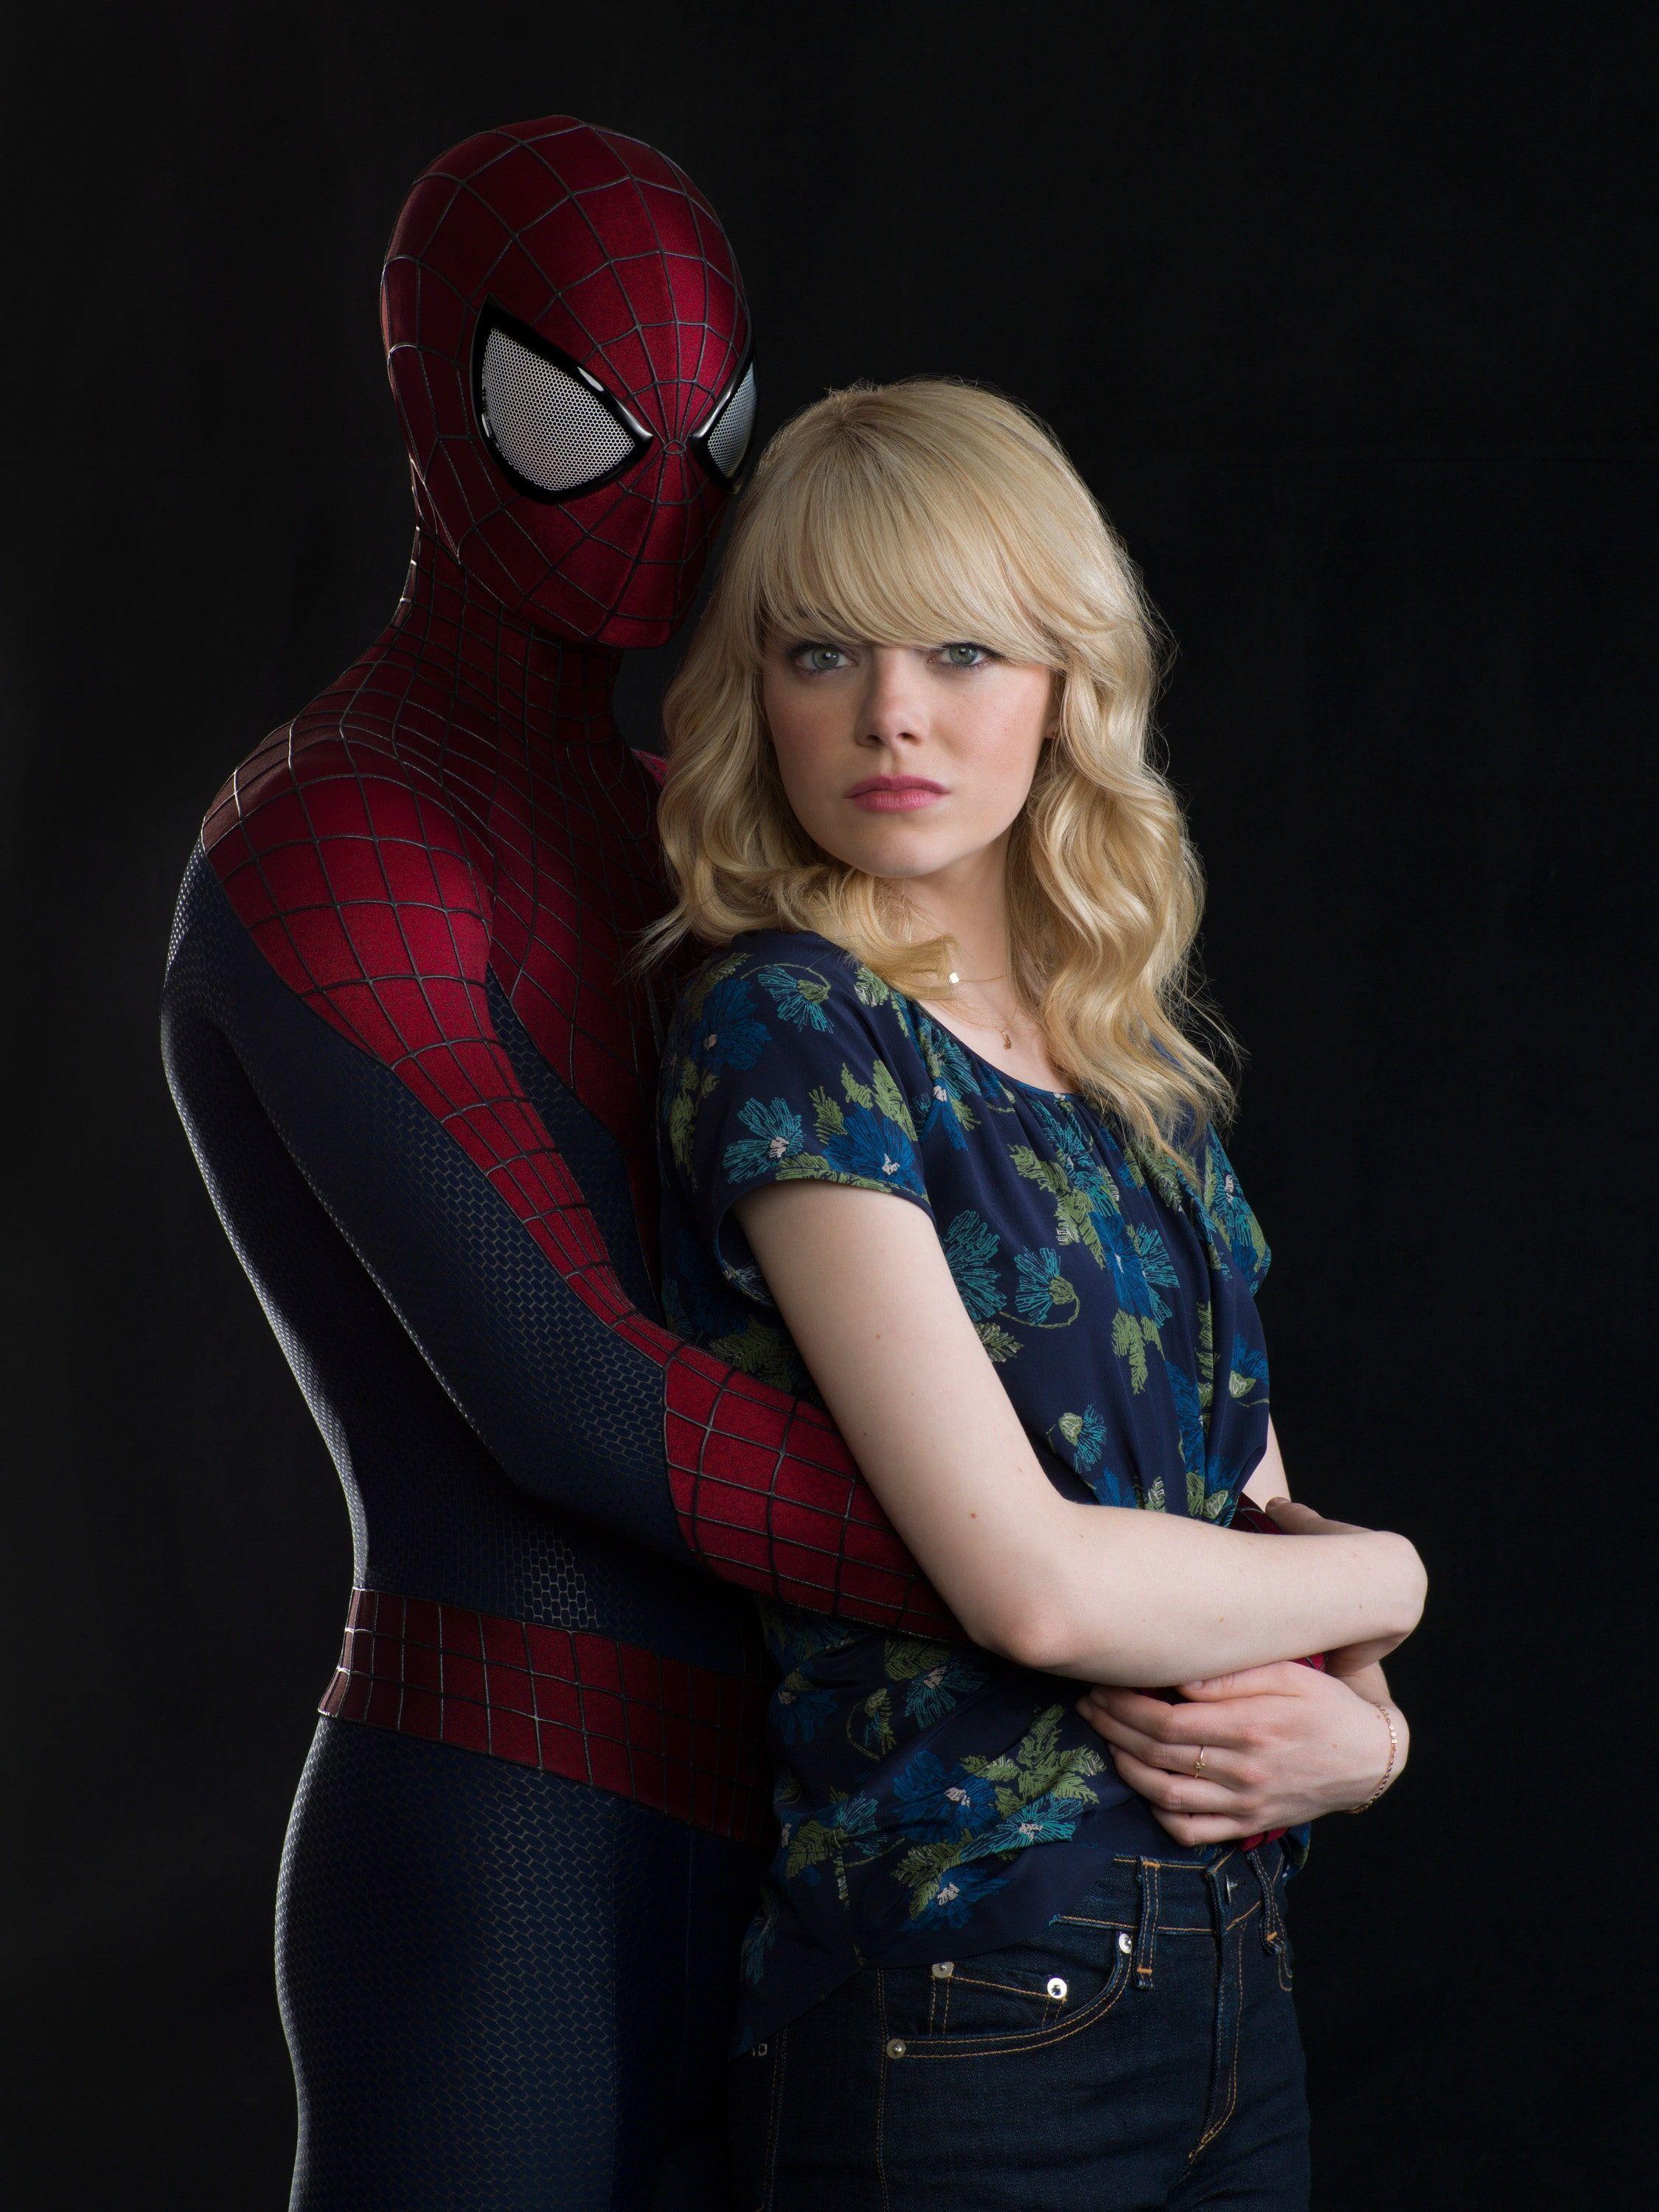 Spider Man and Gwen Stacy Wallpapers - Top Free Spider Man and Gwen ...